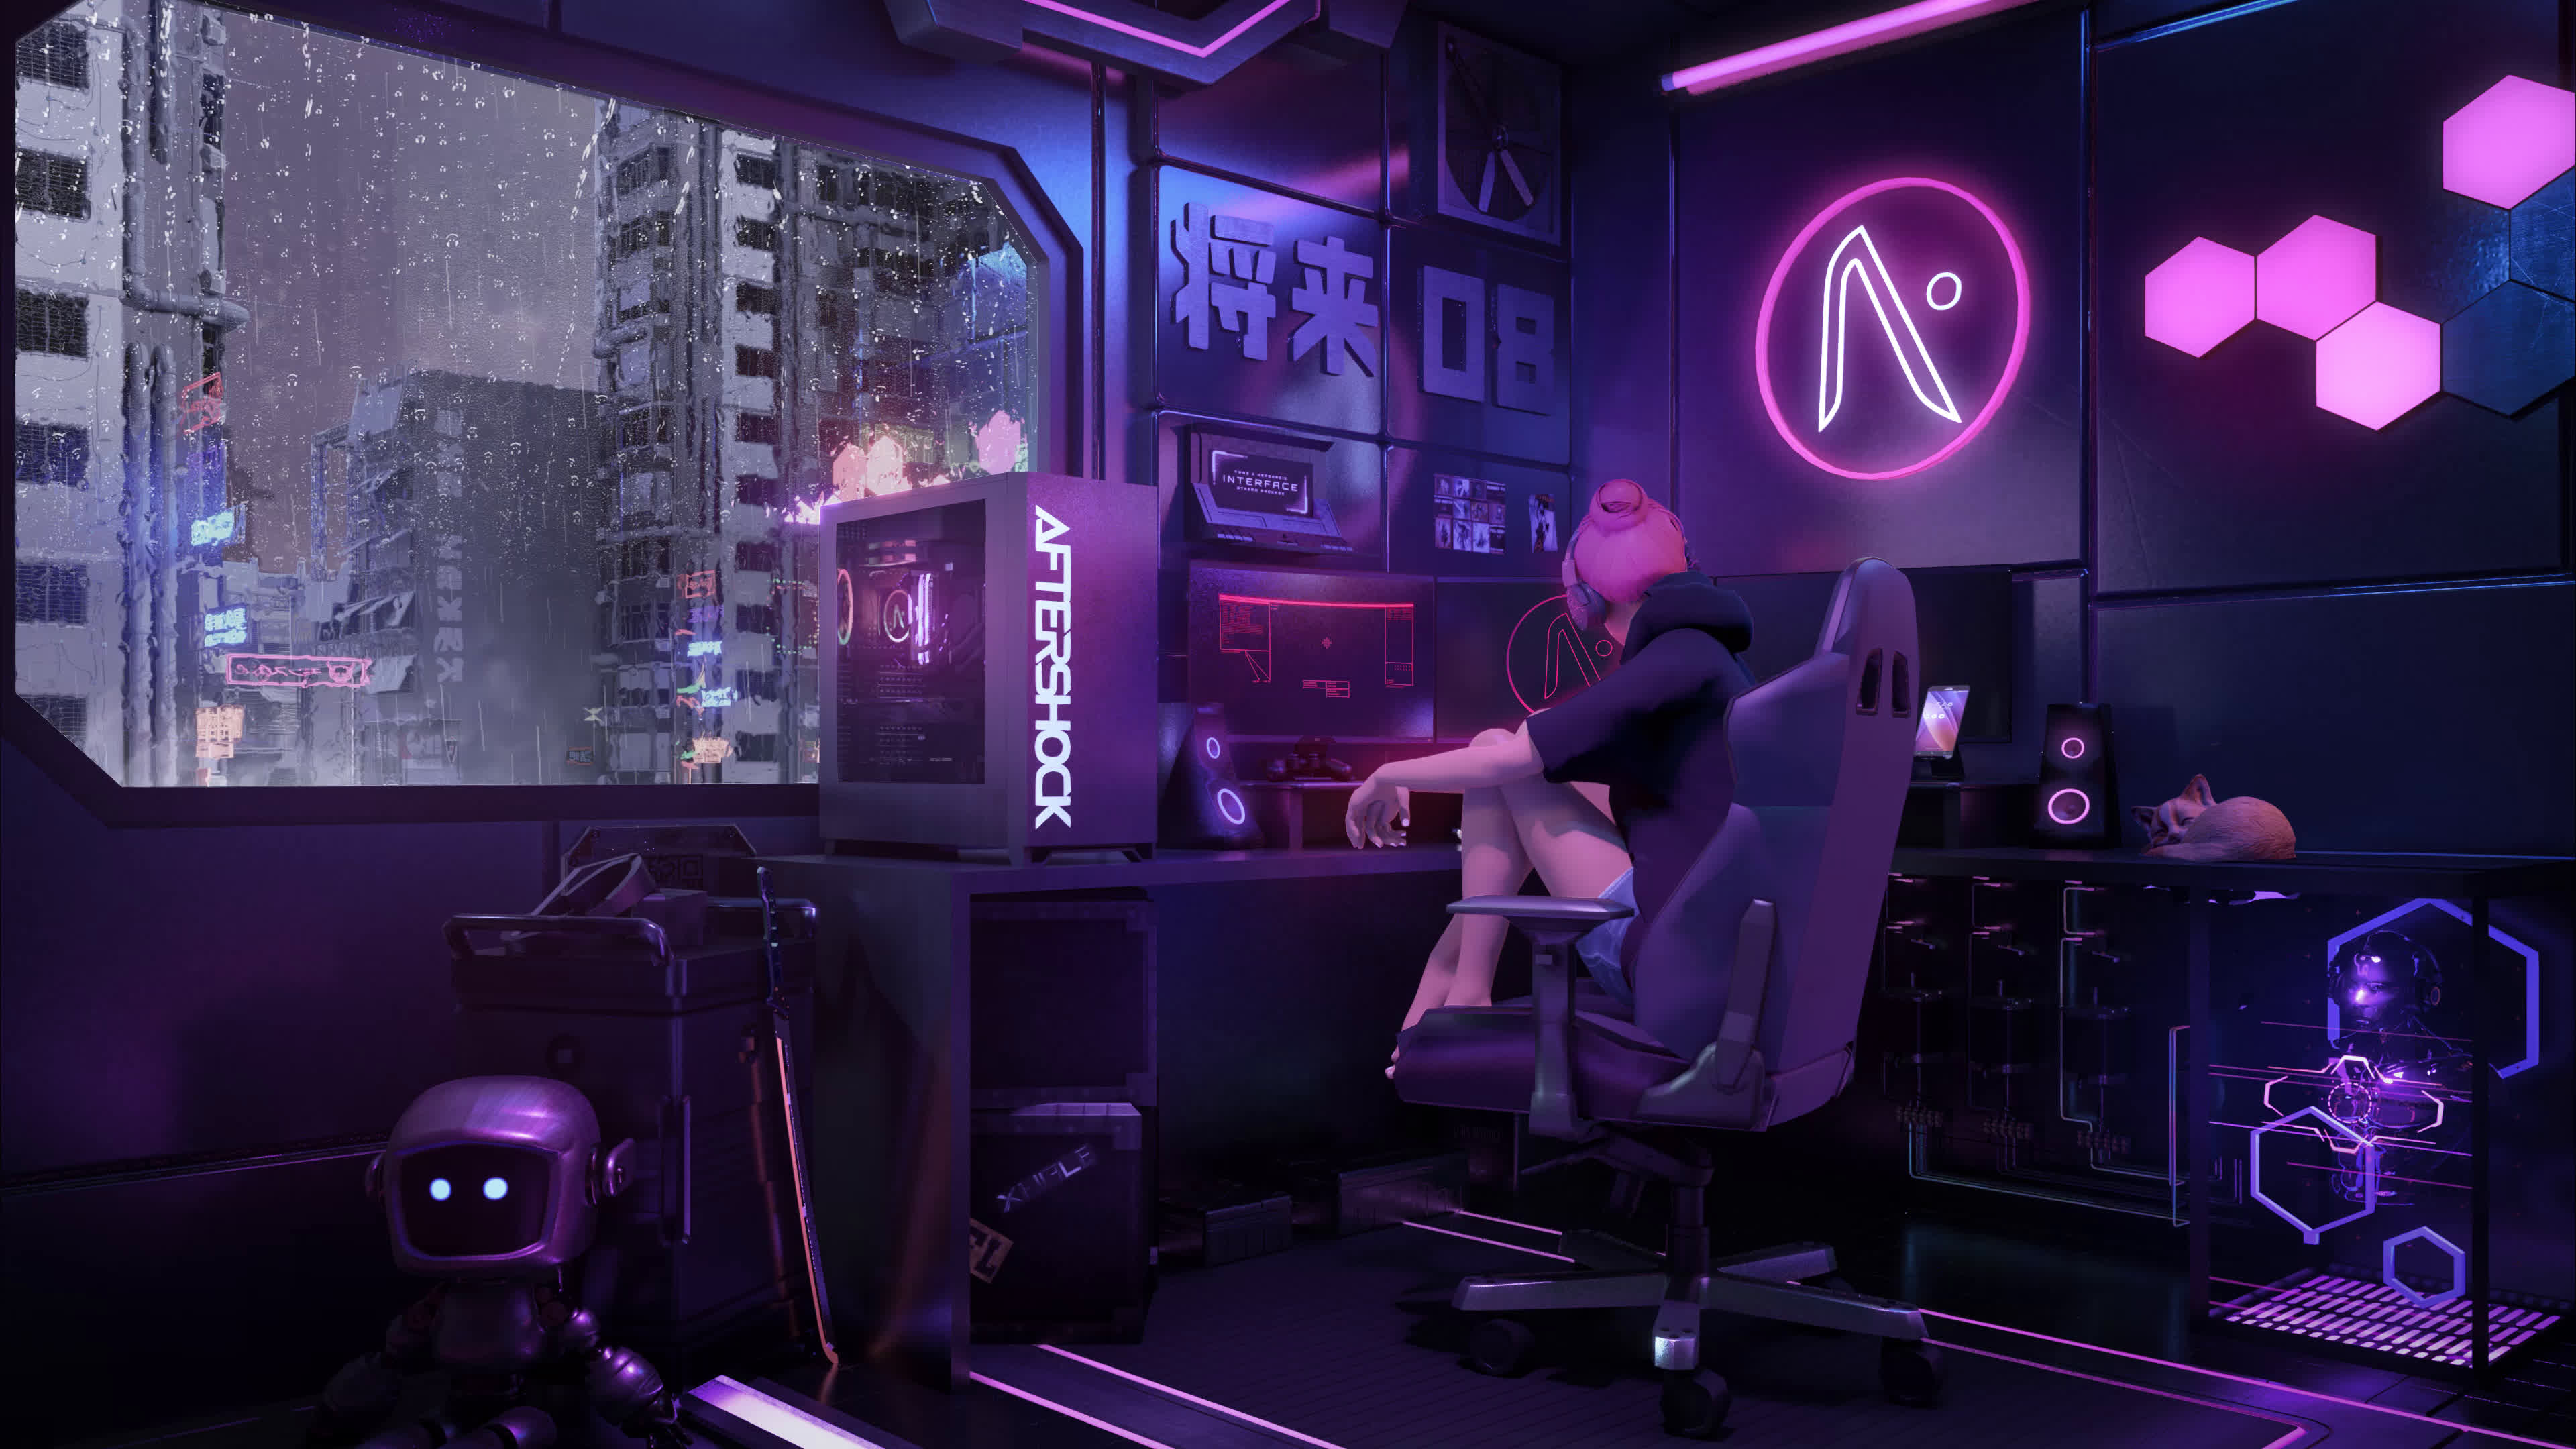 Cool Gaming Room Animated Wallpaper for Gamers